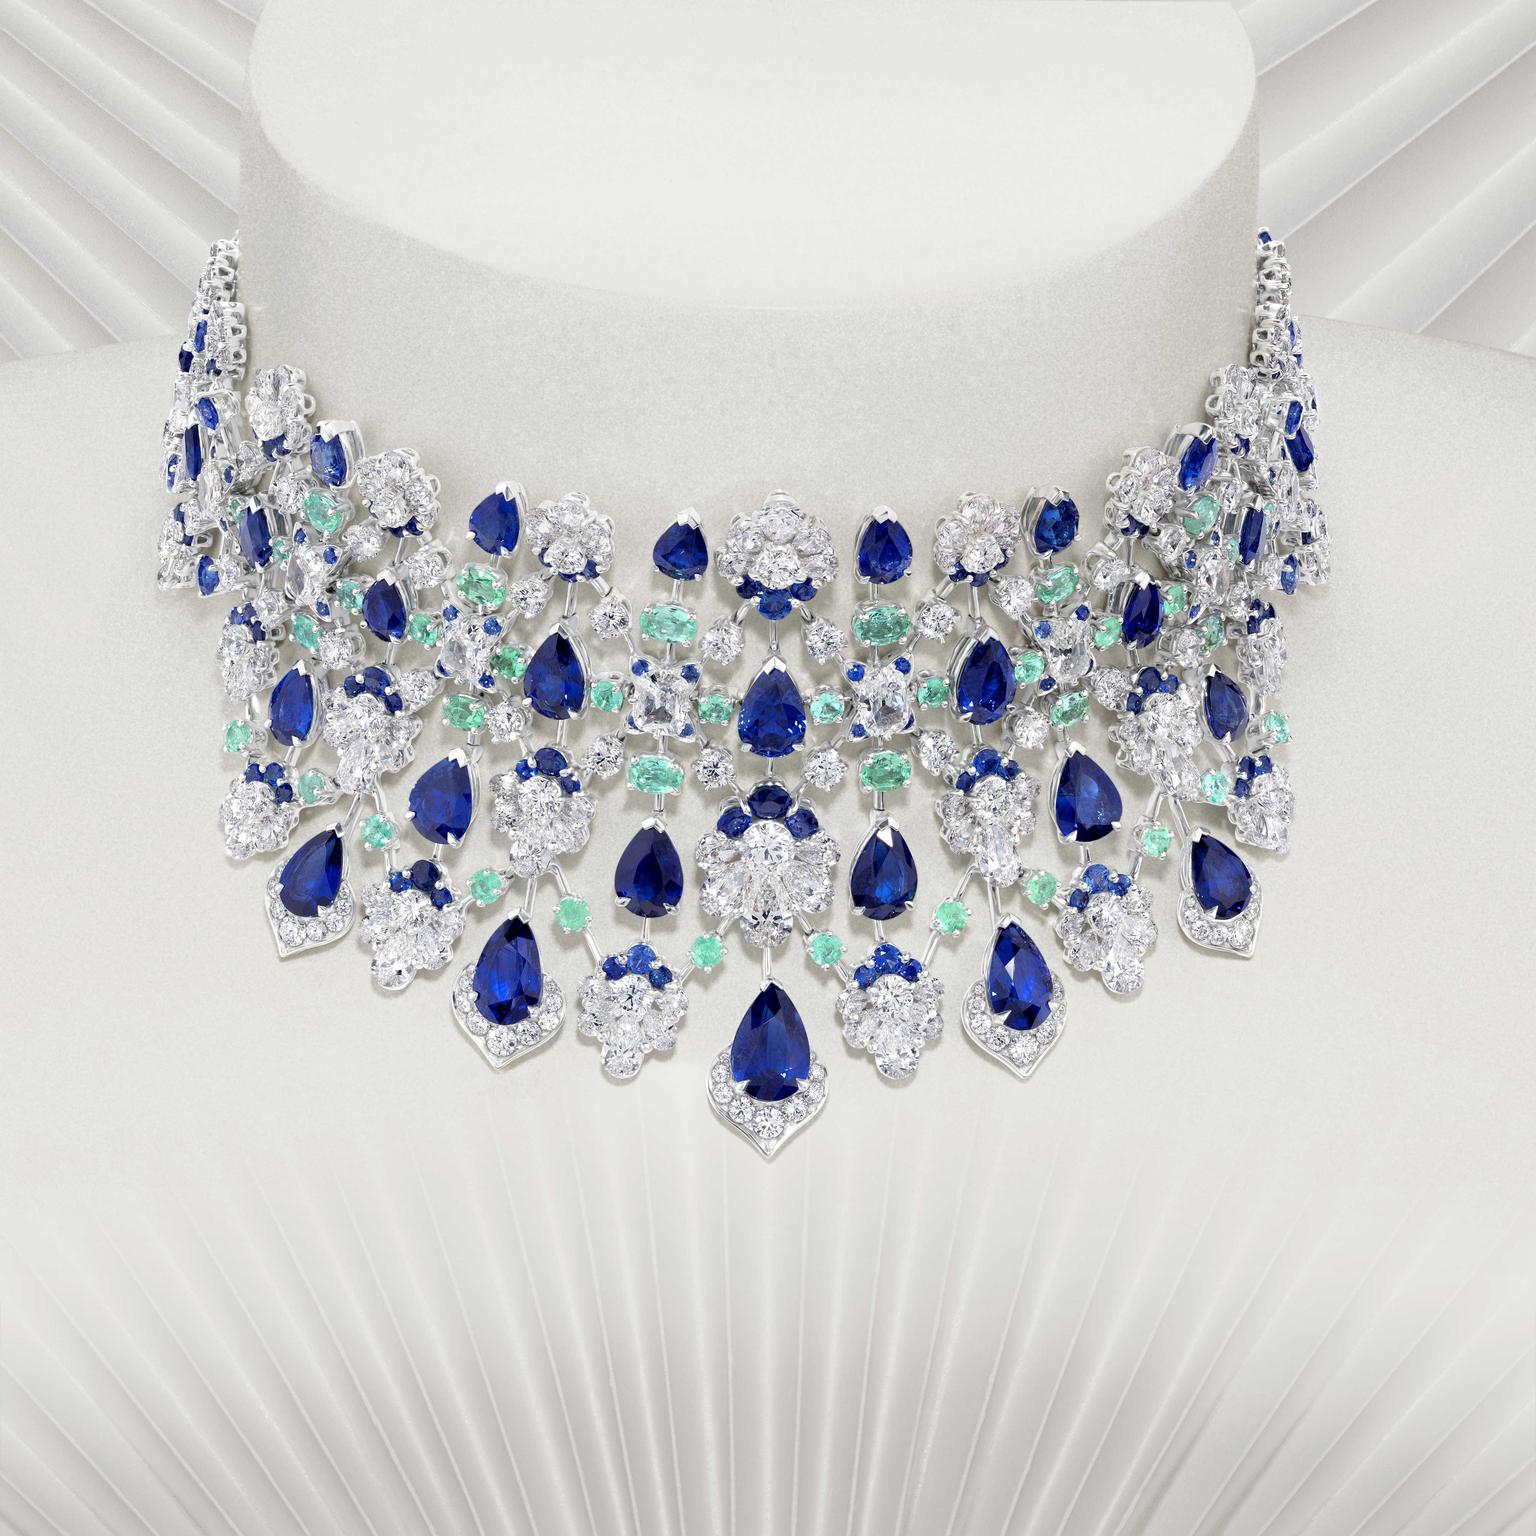 View From the Top: The Best of 2021 High Jewellery Collections